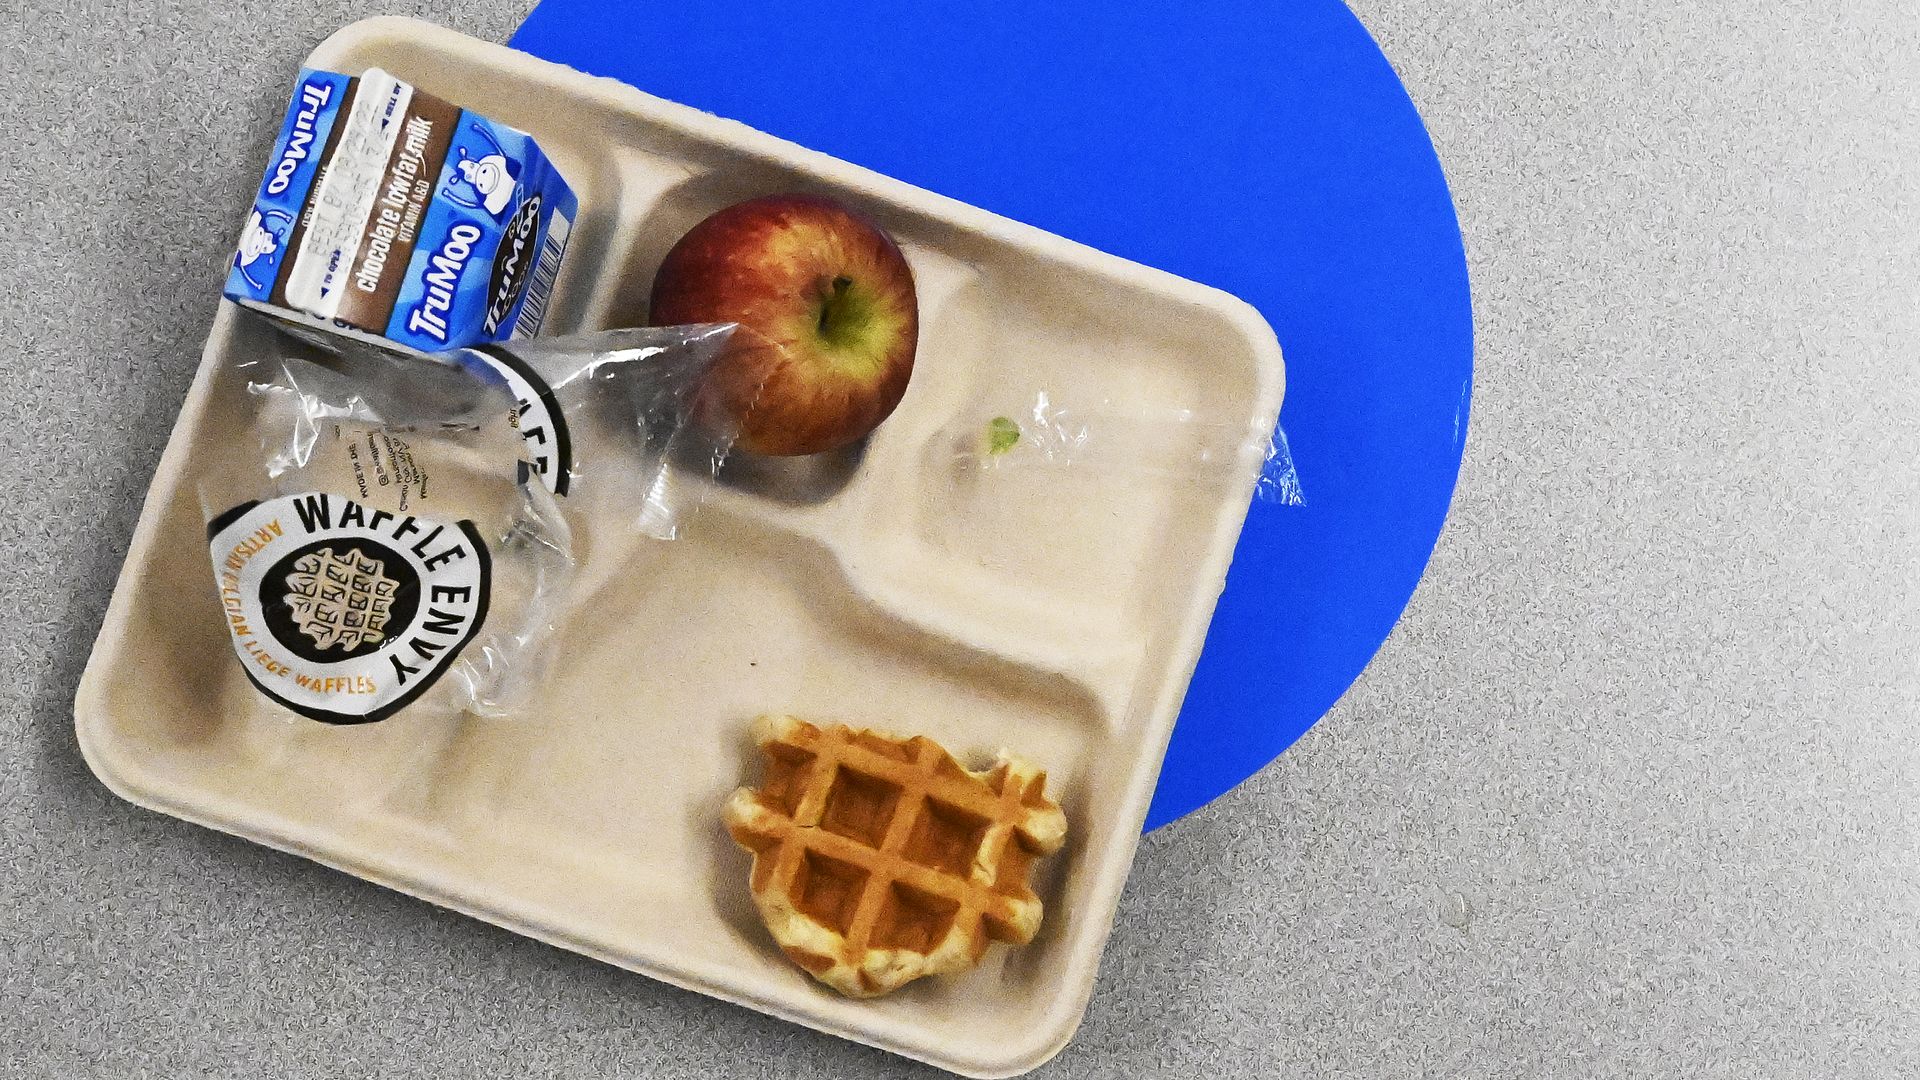 Breakfast is served to students who need it at Deane Elementary in Lakewood. Photo: RJ Sangosti/Denver Post via Getty Images